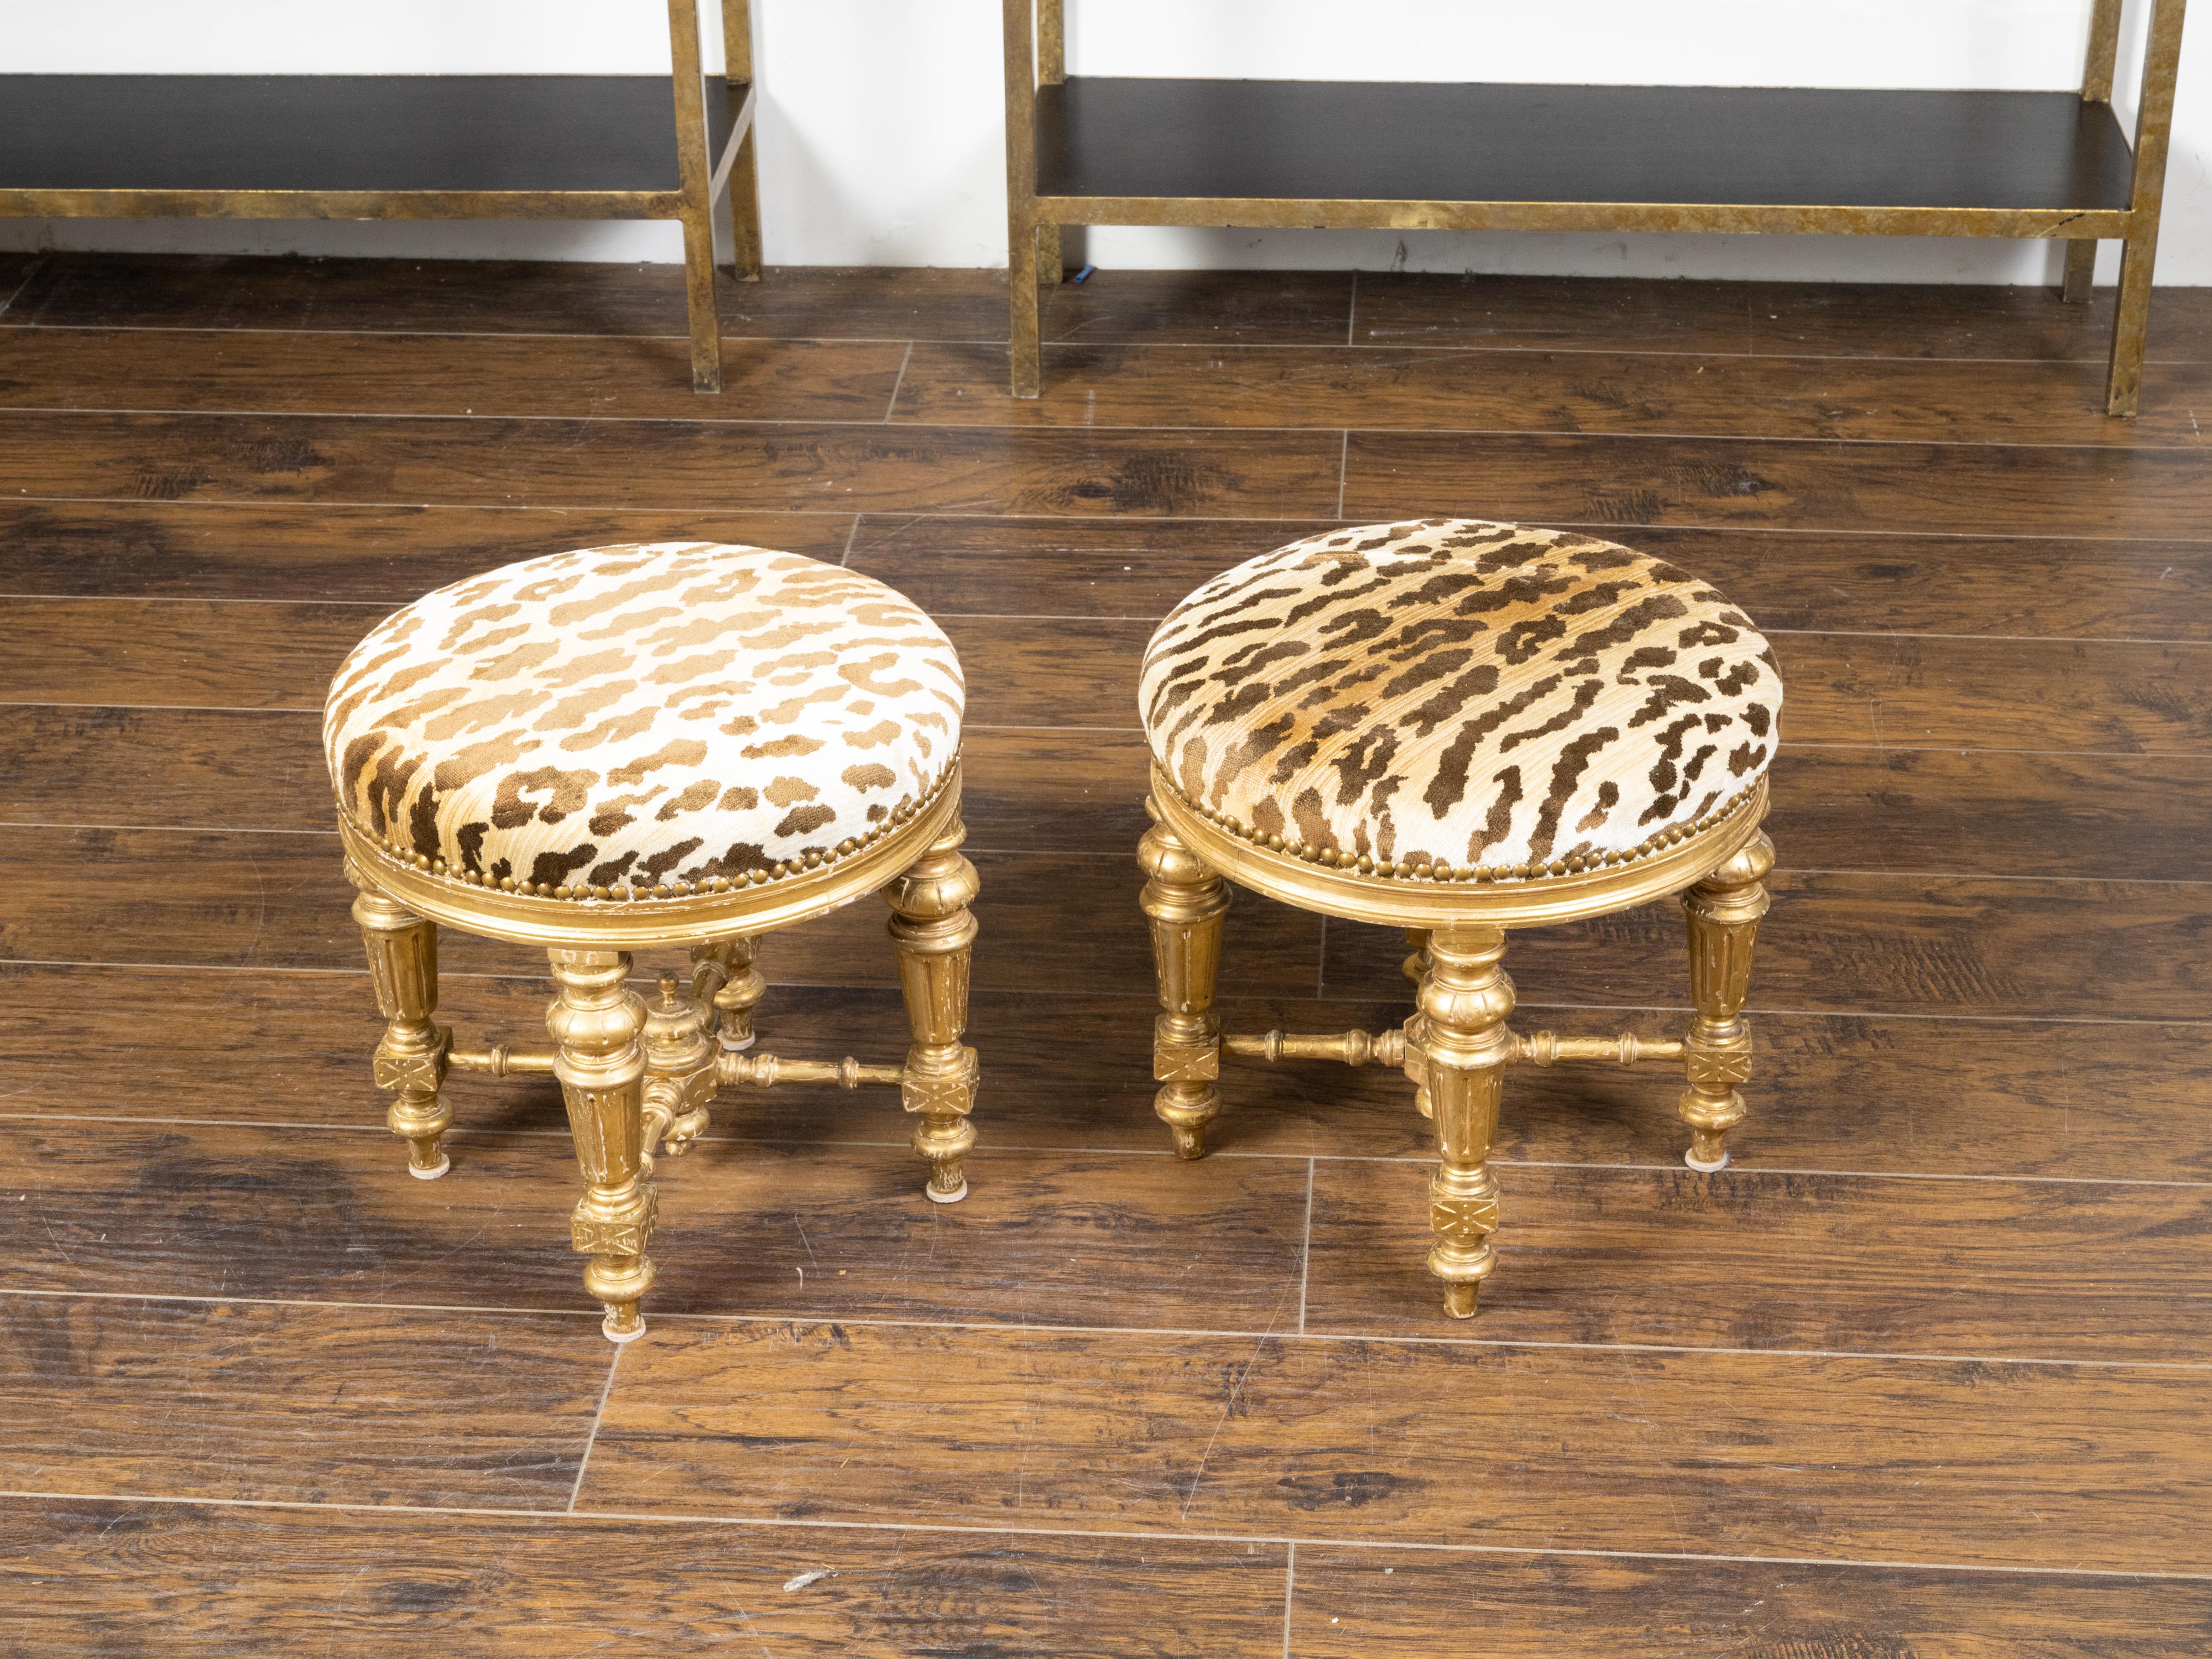 Pair of 19th Century French Giltwood Stools with Fluted Legs and Upholstery For Sale 6